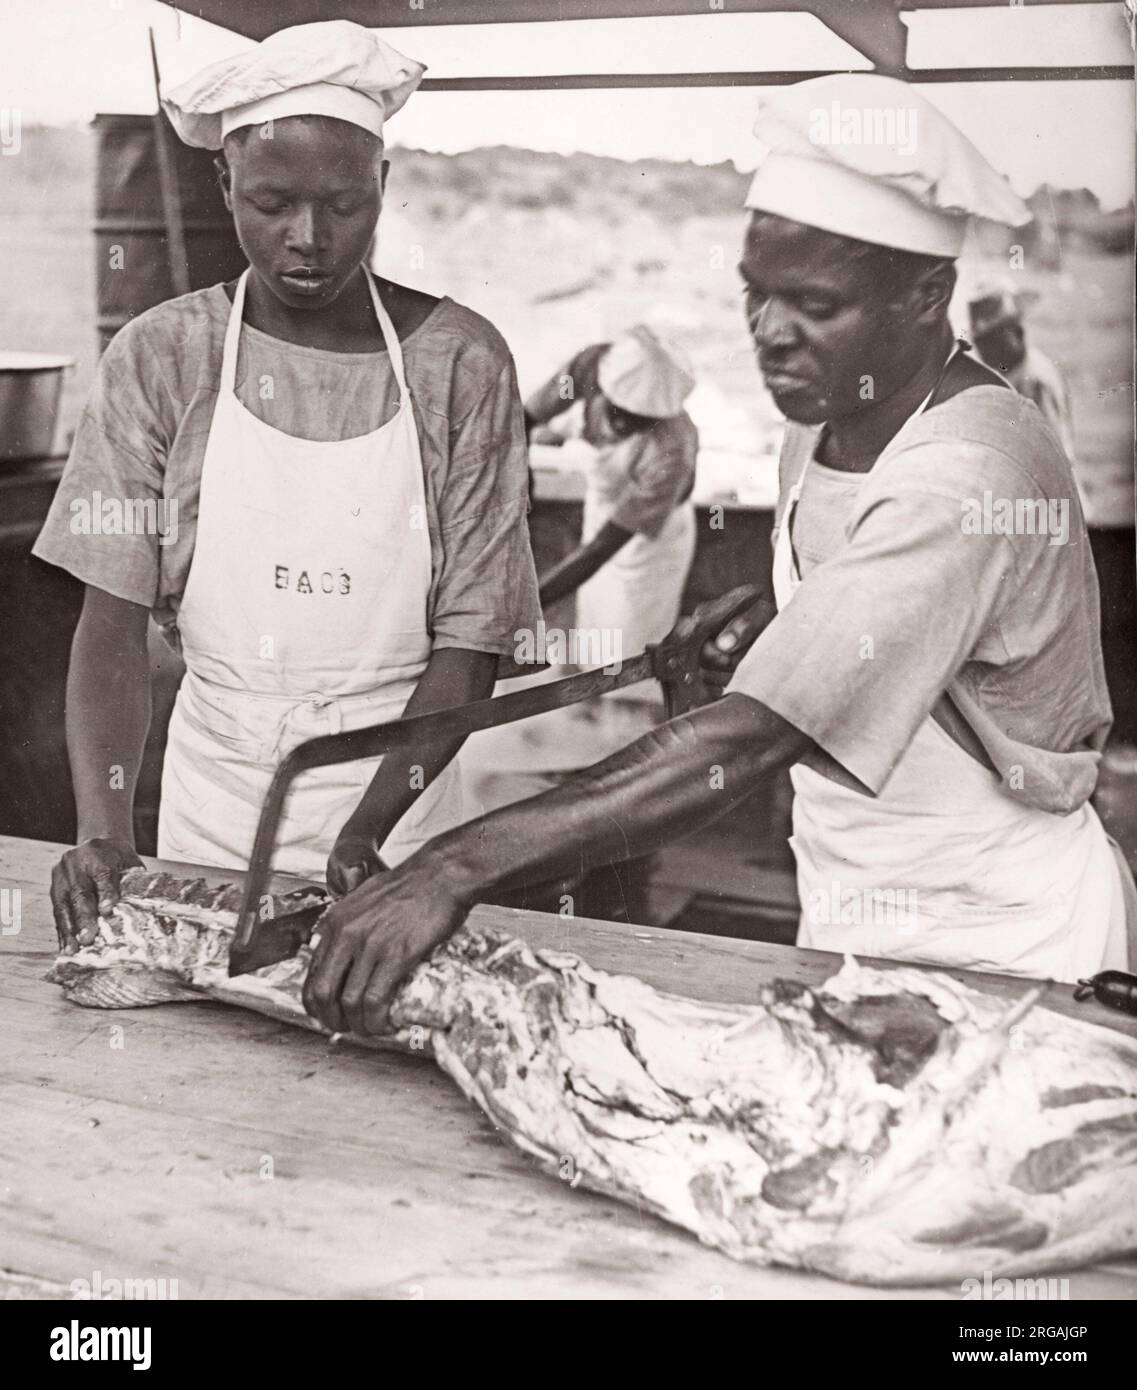 1940s East Africa -army cooks at work Photograph by a British army recruitment officer stationed in East Africa and the Middle East during World War II Stock Photo